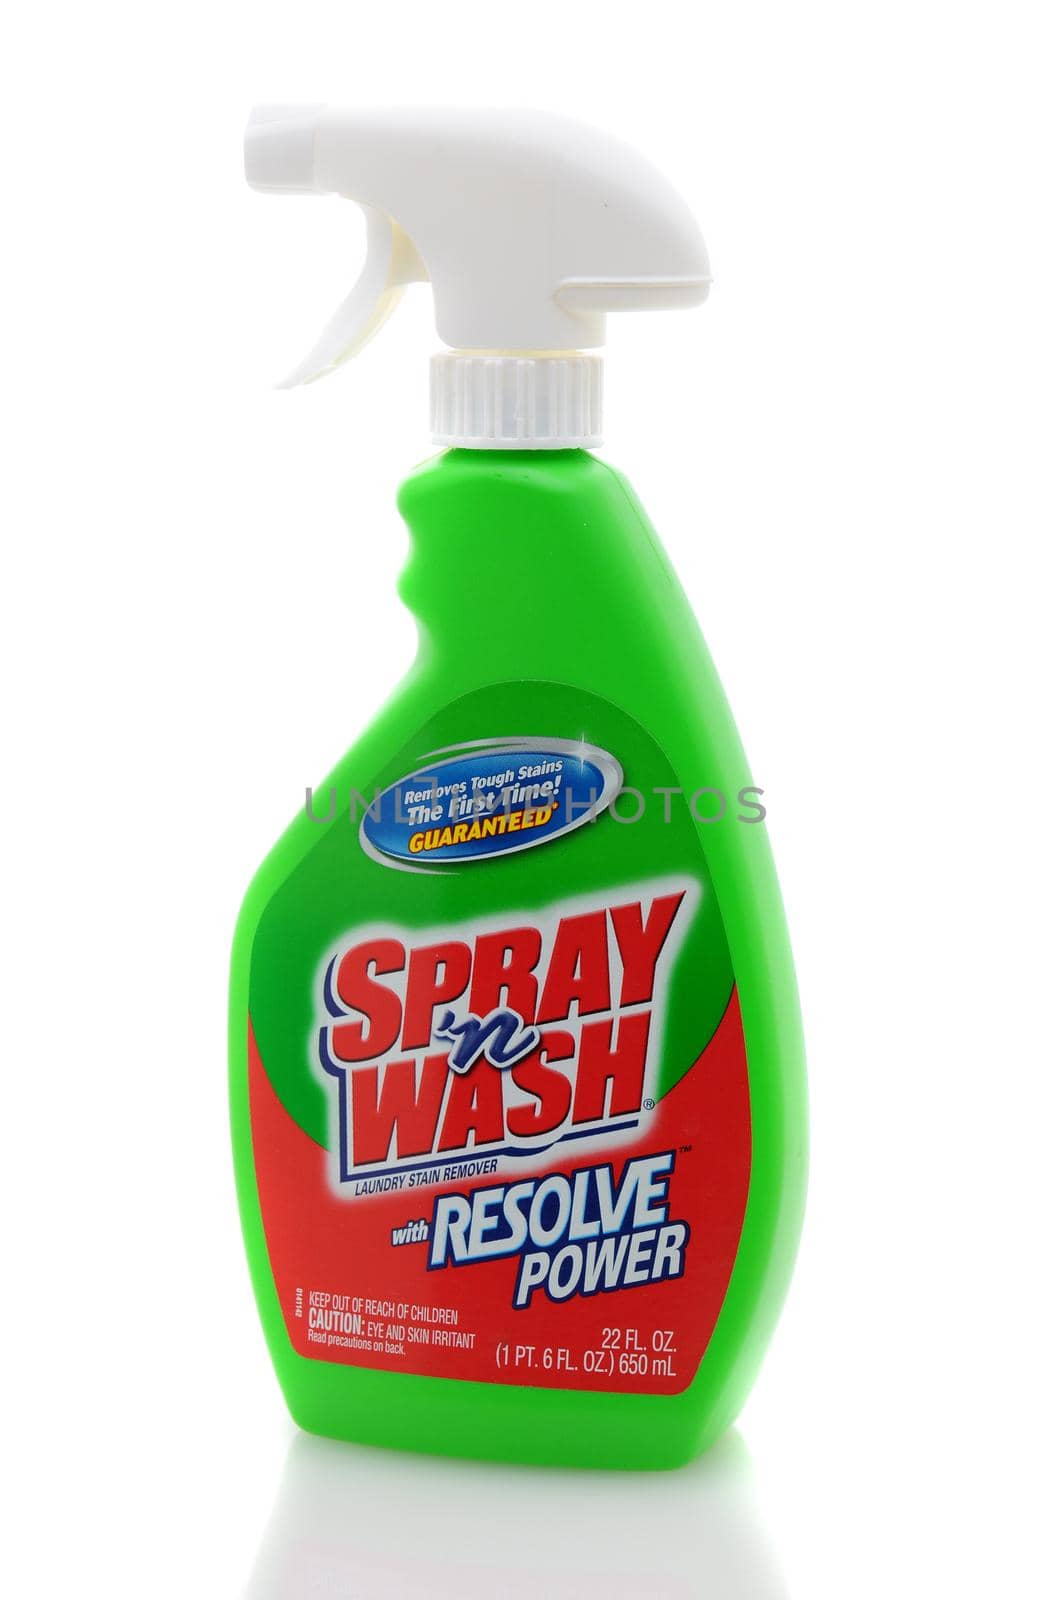 Spray 'n Wash Laundry Stain Remover by sCukrov